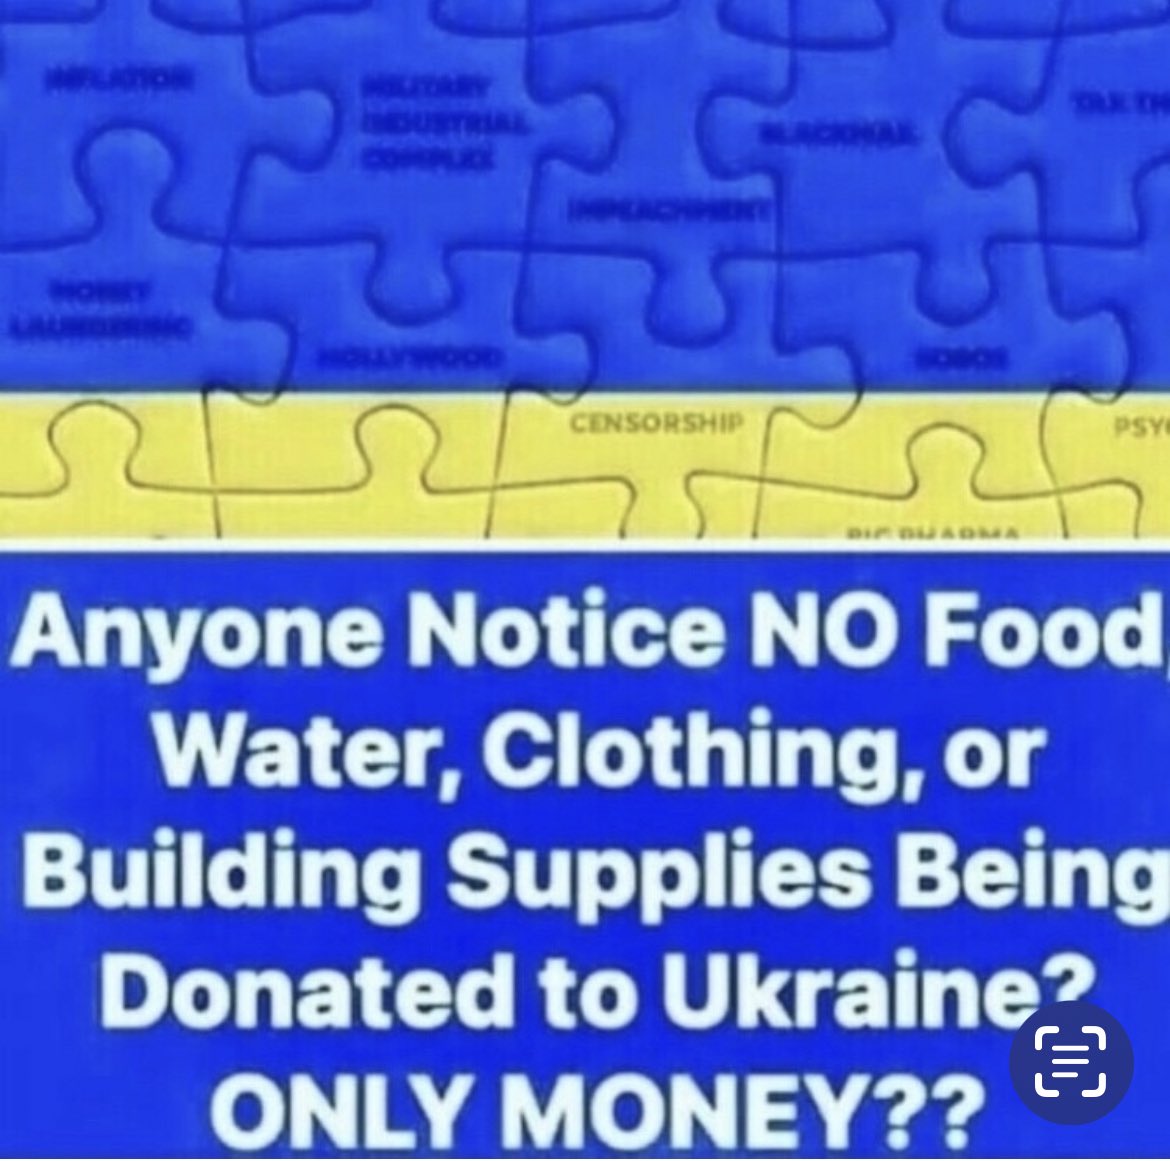 Because food, water, clothing and supplies can’t be laundered 🤬